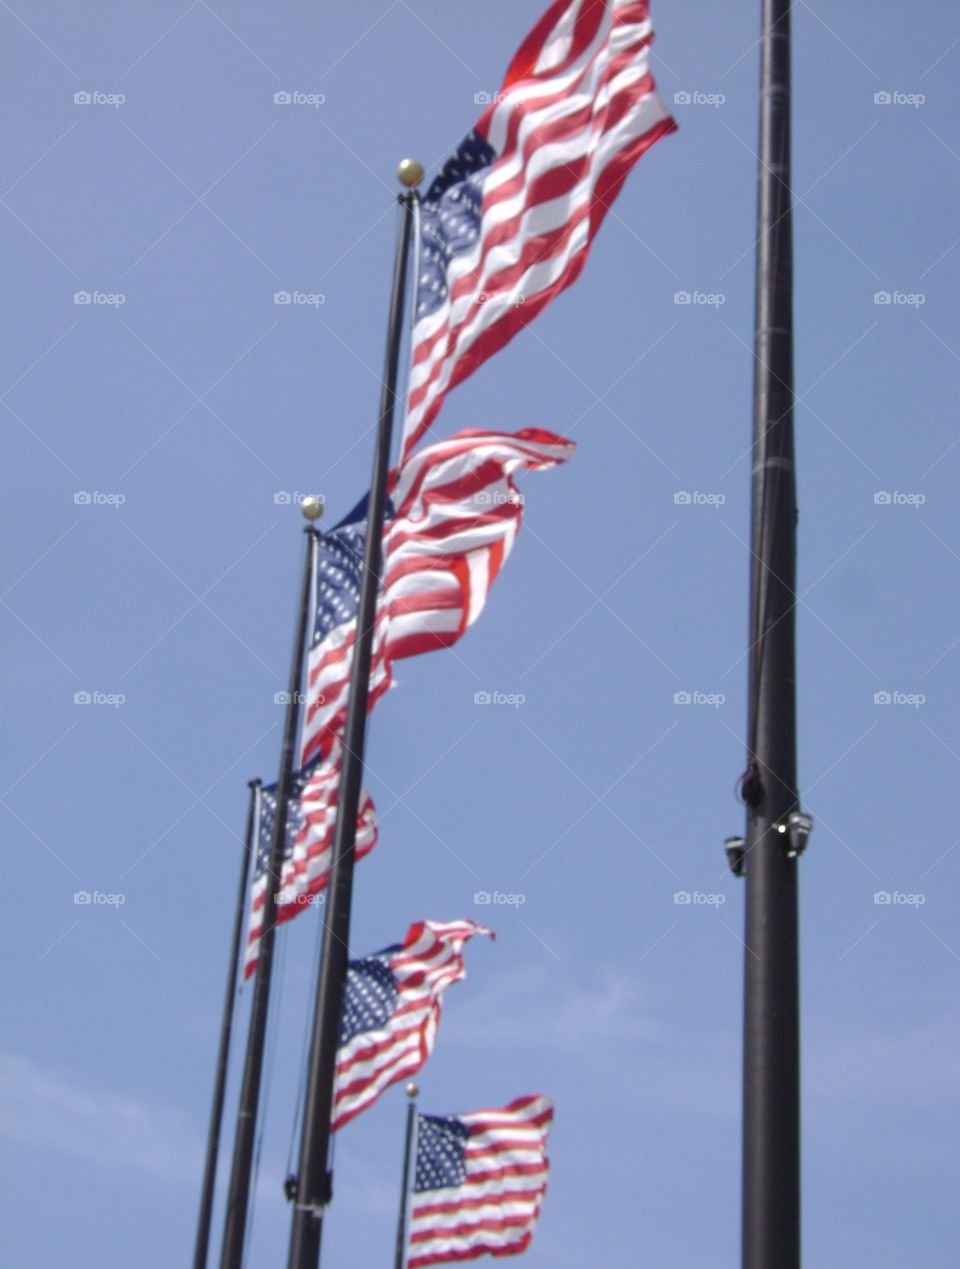 Several AMERICAN flags at the pier in Chicago